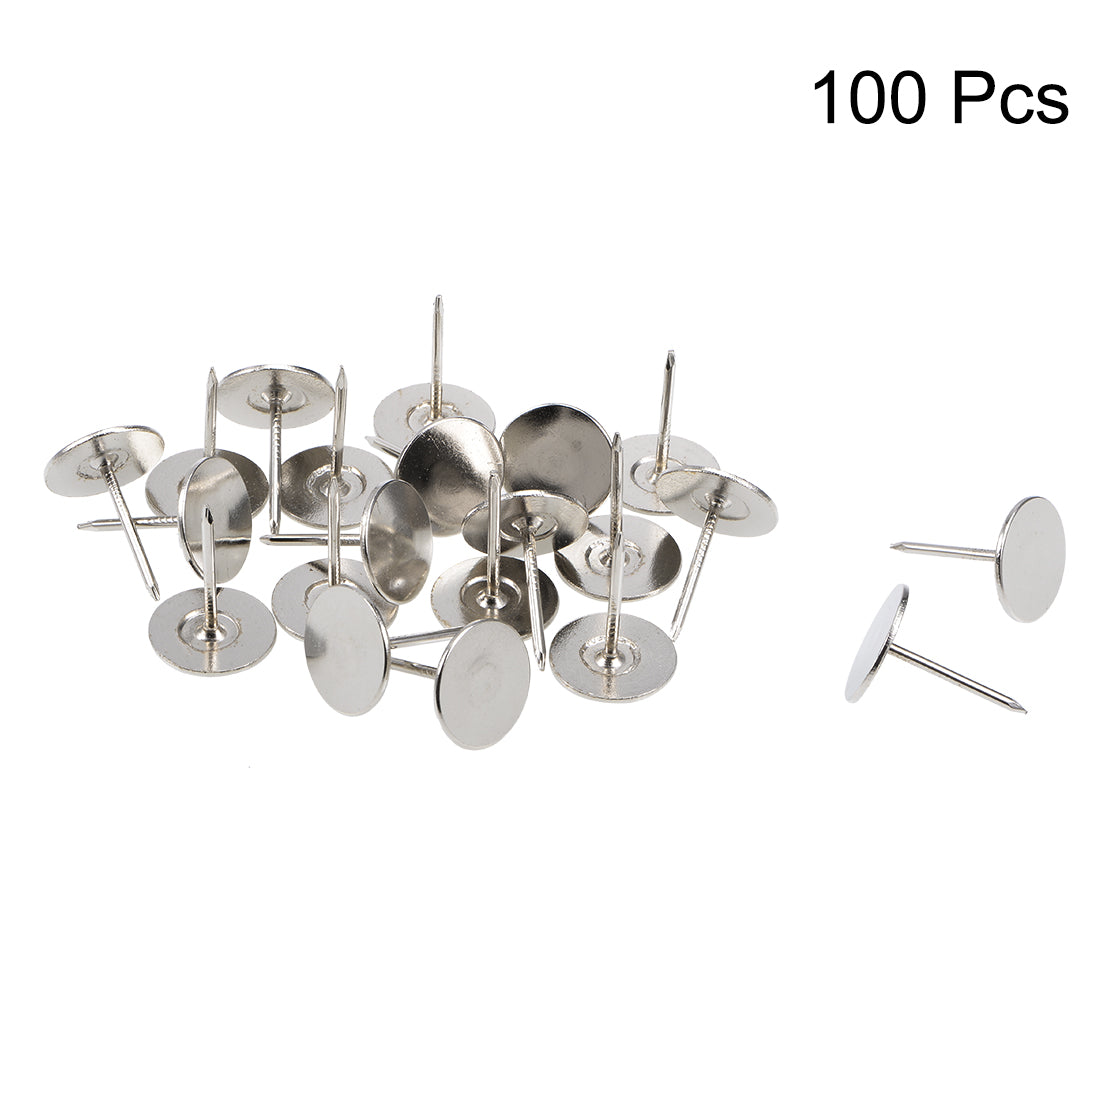 uxcell Uxcell Upholstery Nails Tacks 9.5mmx10mm Flat Head Furniture Nails Pins Silver Tone 100 Pcs